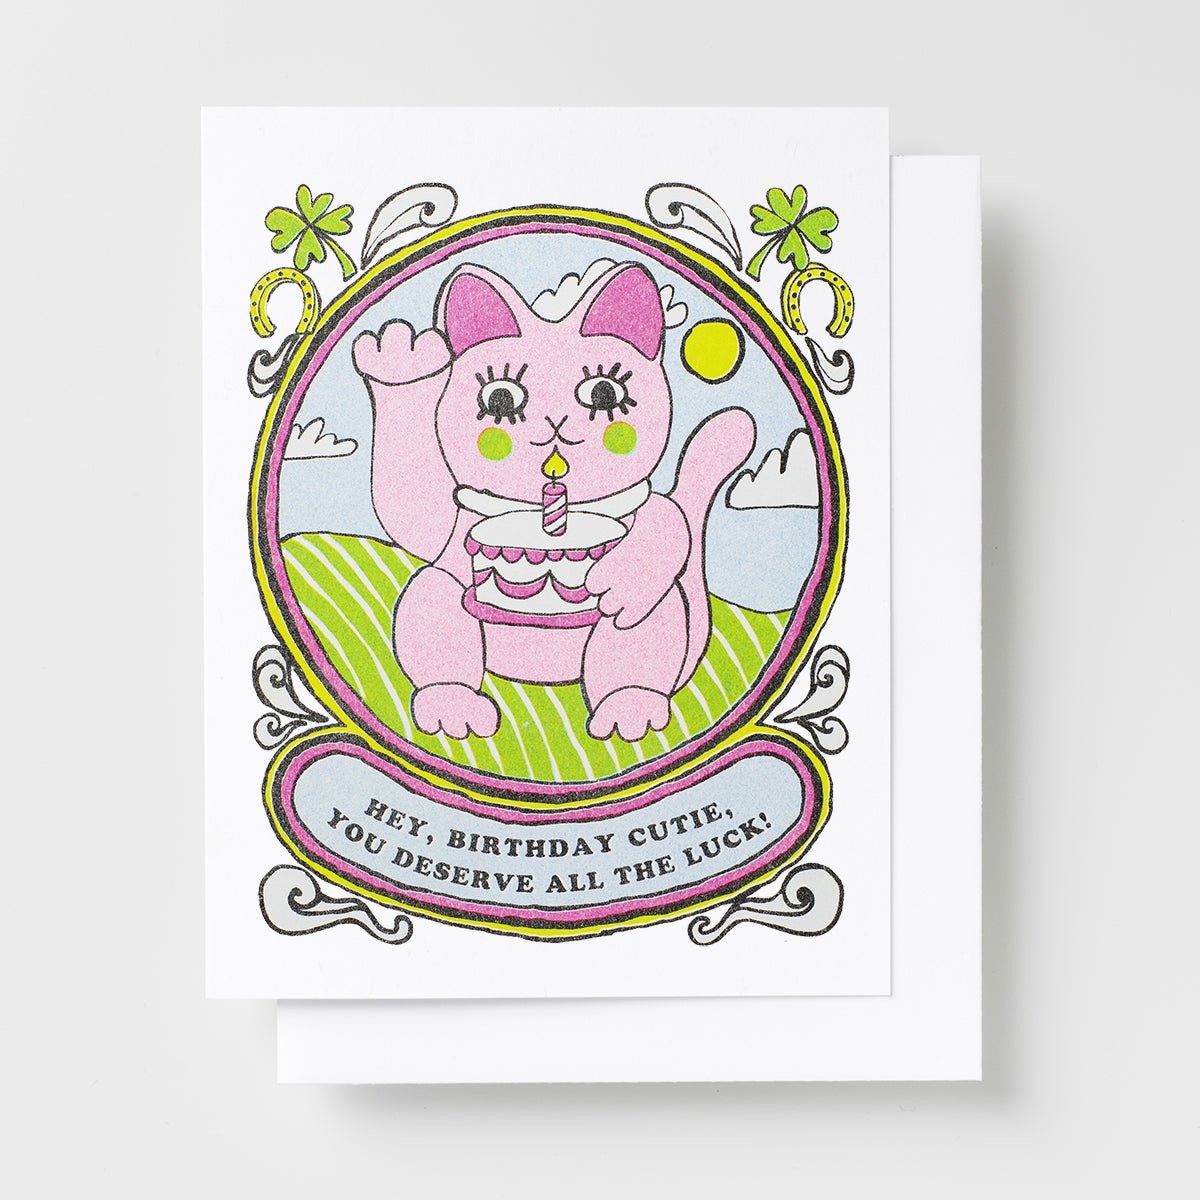 Bday Cutie Lucky You Were Born - Risograph Card - Yellow Owl Workshop